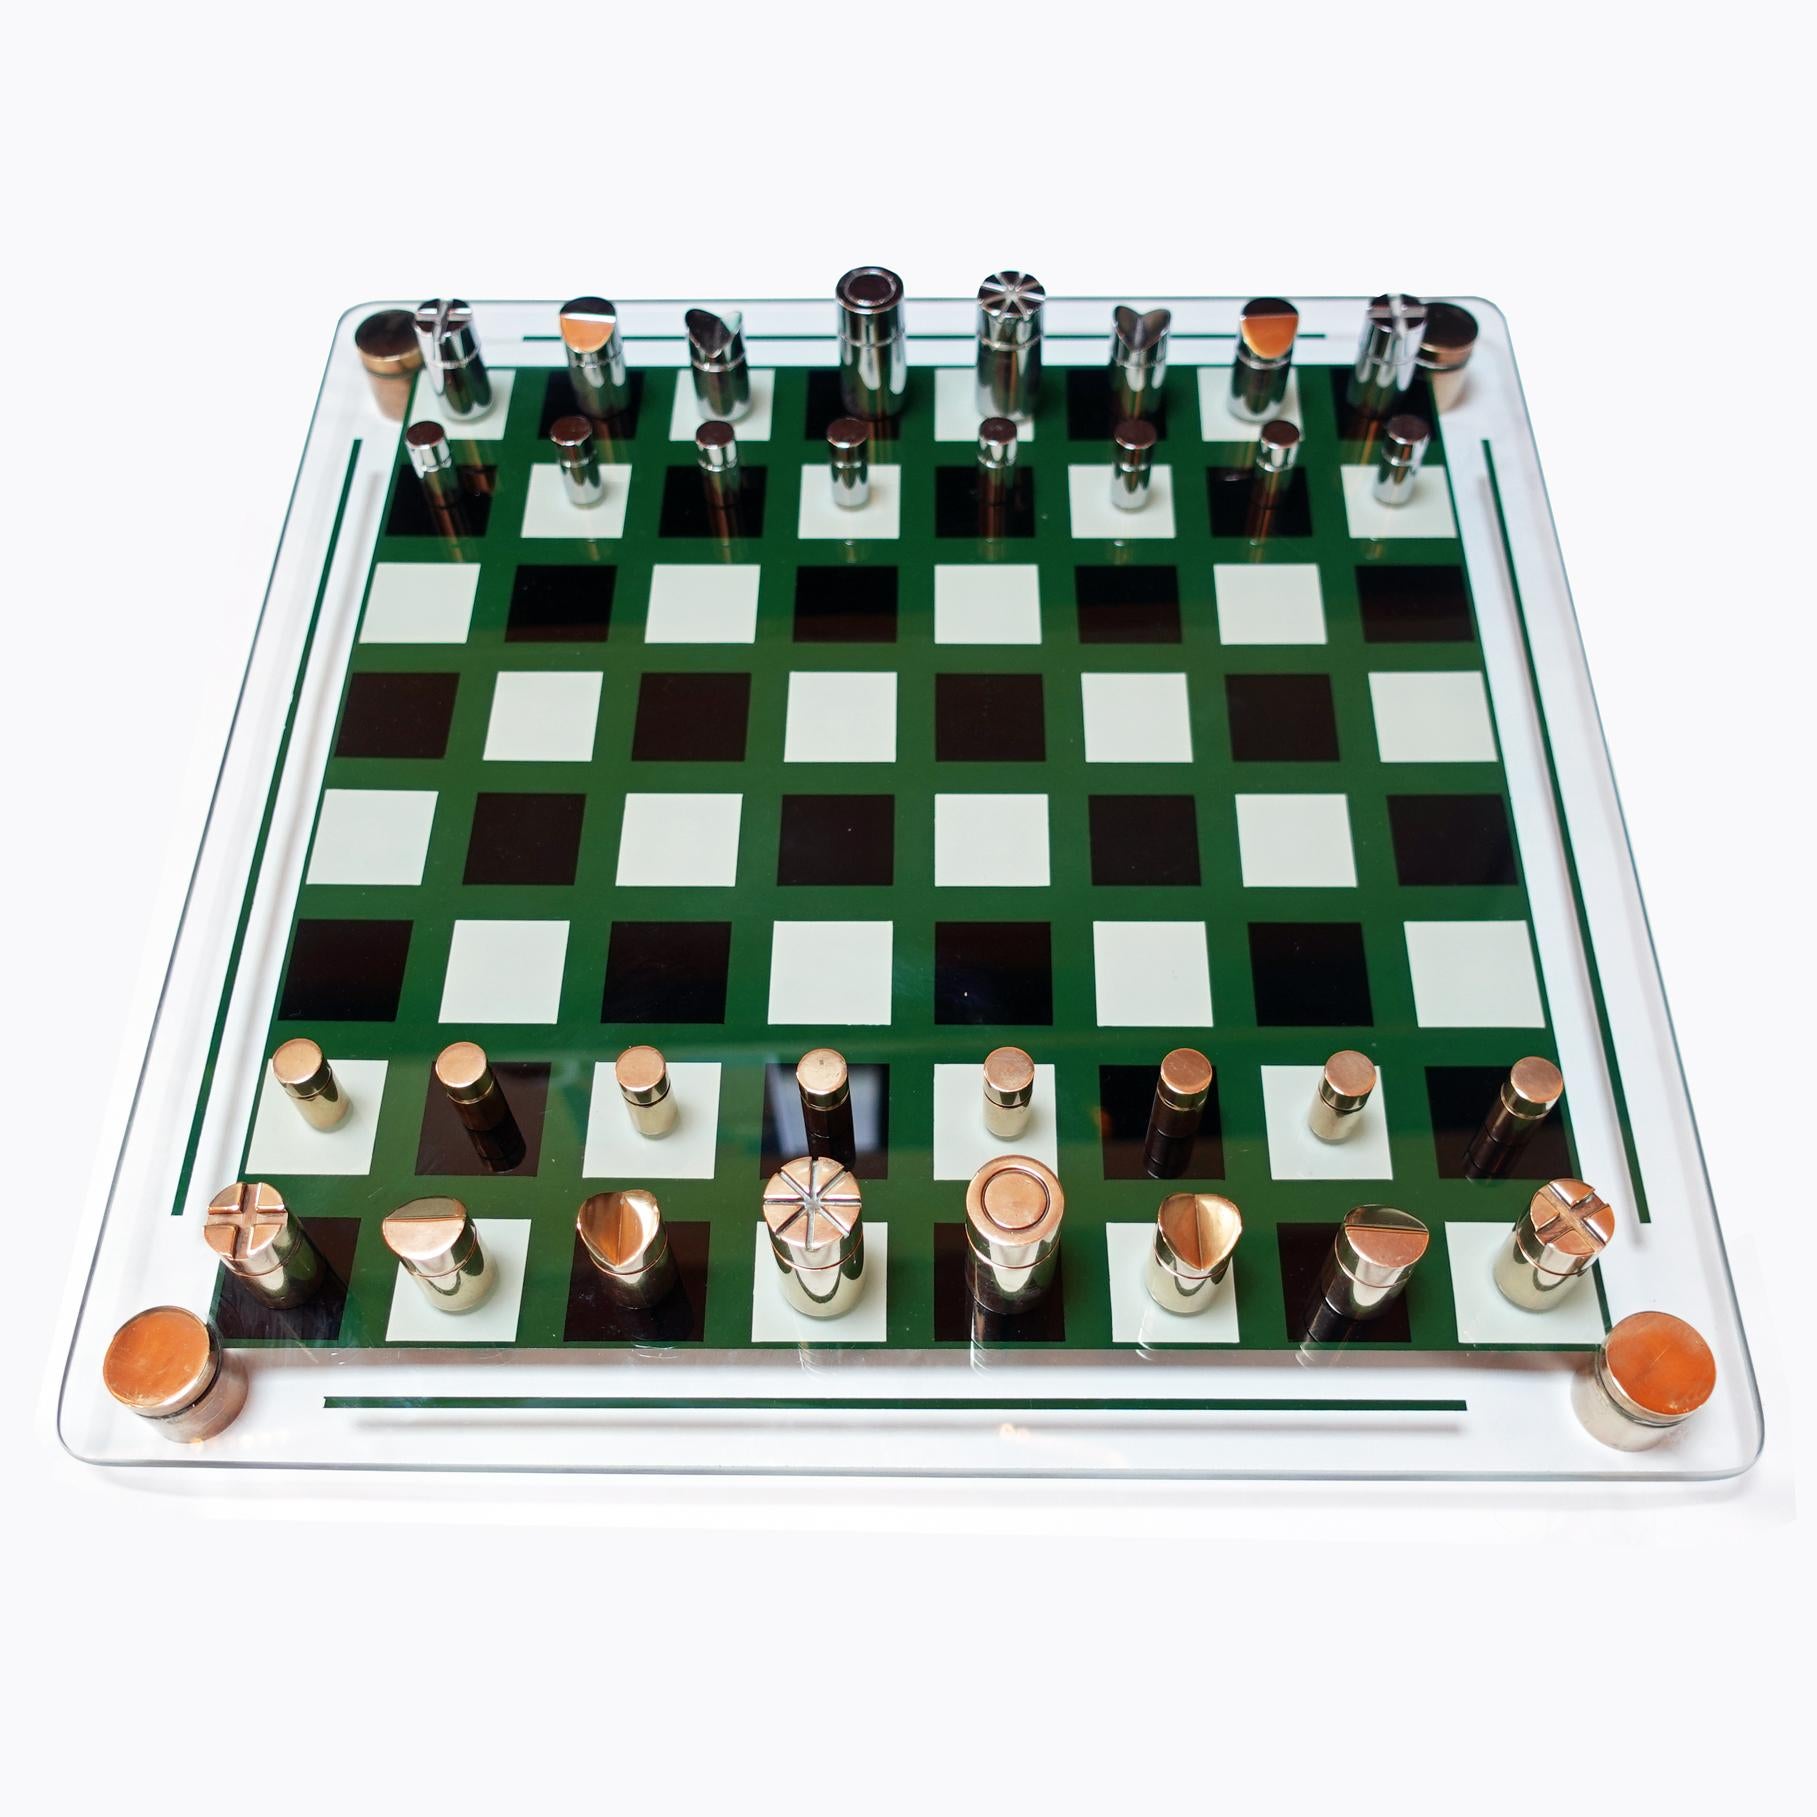 1970s chess set designed and manufactured in France.

Glass board with brass feet. chrome-plated steel and brass pieces.

Chess board measures: 41cm x 41cm x H 2.5cm
King measures: H 4.5cm x D 2.5cm
Pawn measures: H 2.5cm x D 1.2cm.